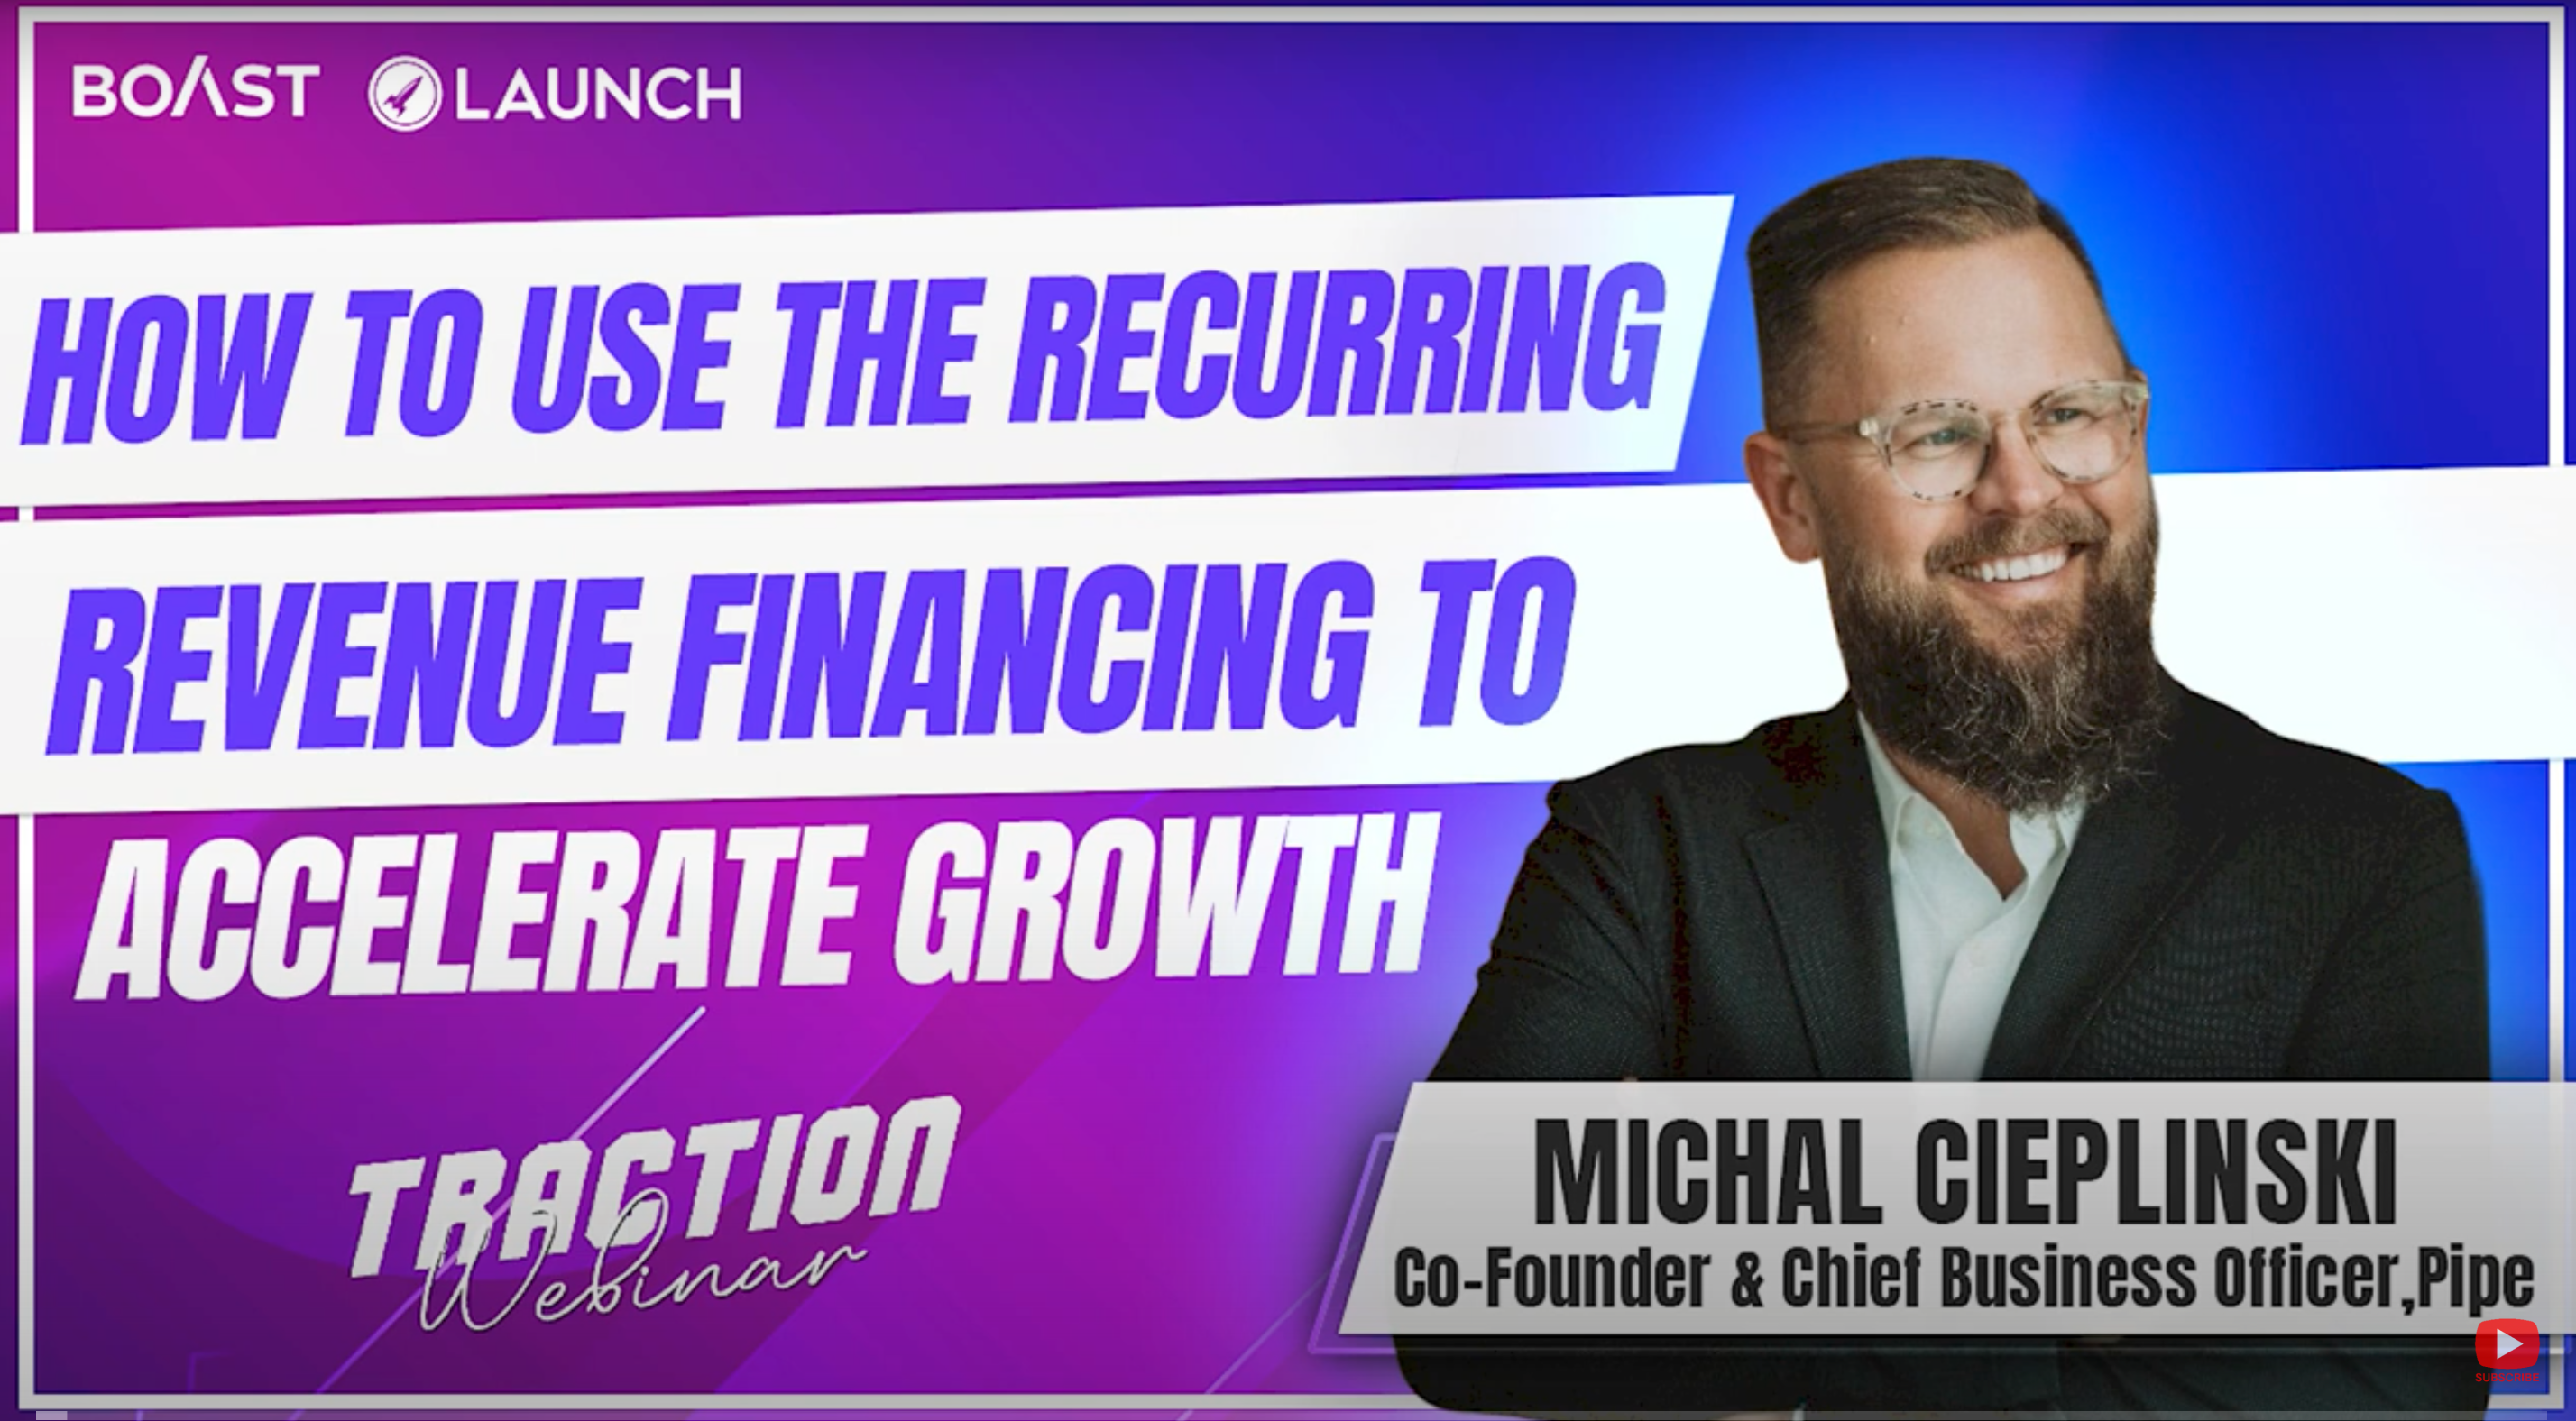 How to Use the Recurring Revenue Financing to Accelerate Growth with Michal Cieplinski, Pipe